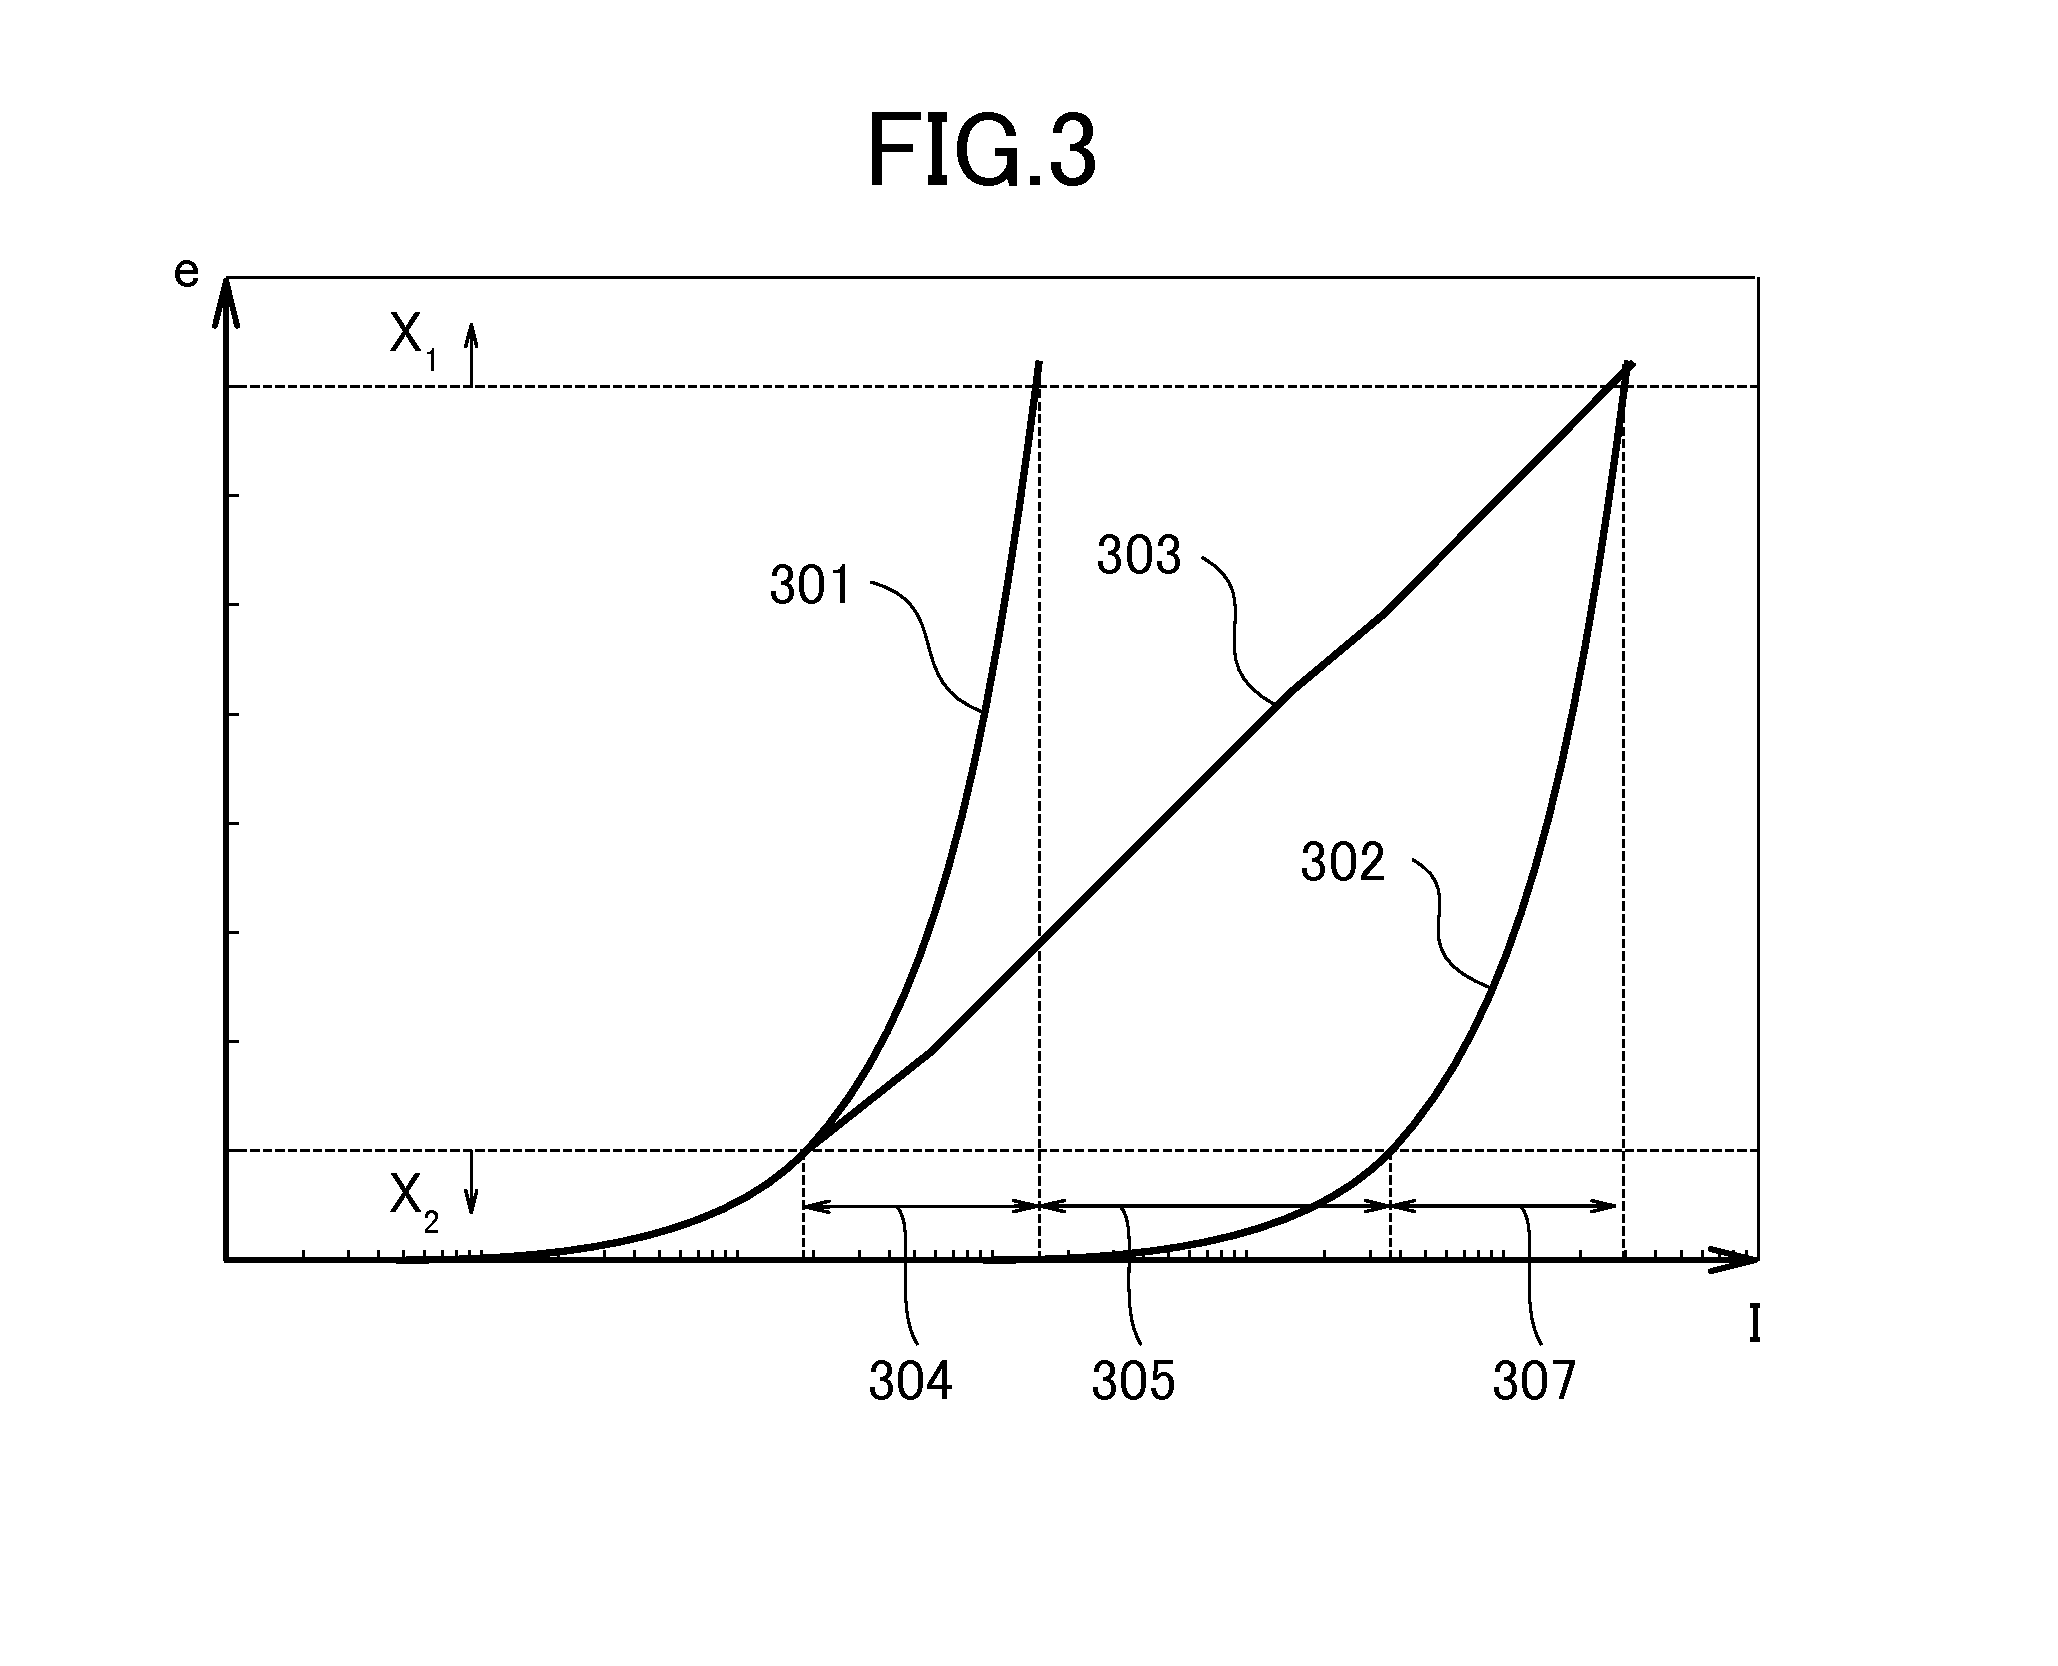 Imaging apparatus capable of generating an appropriate color image